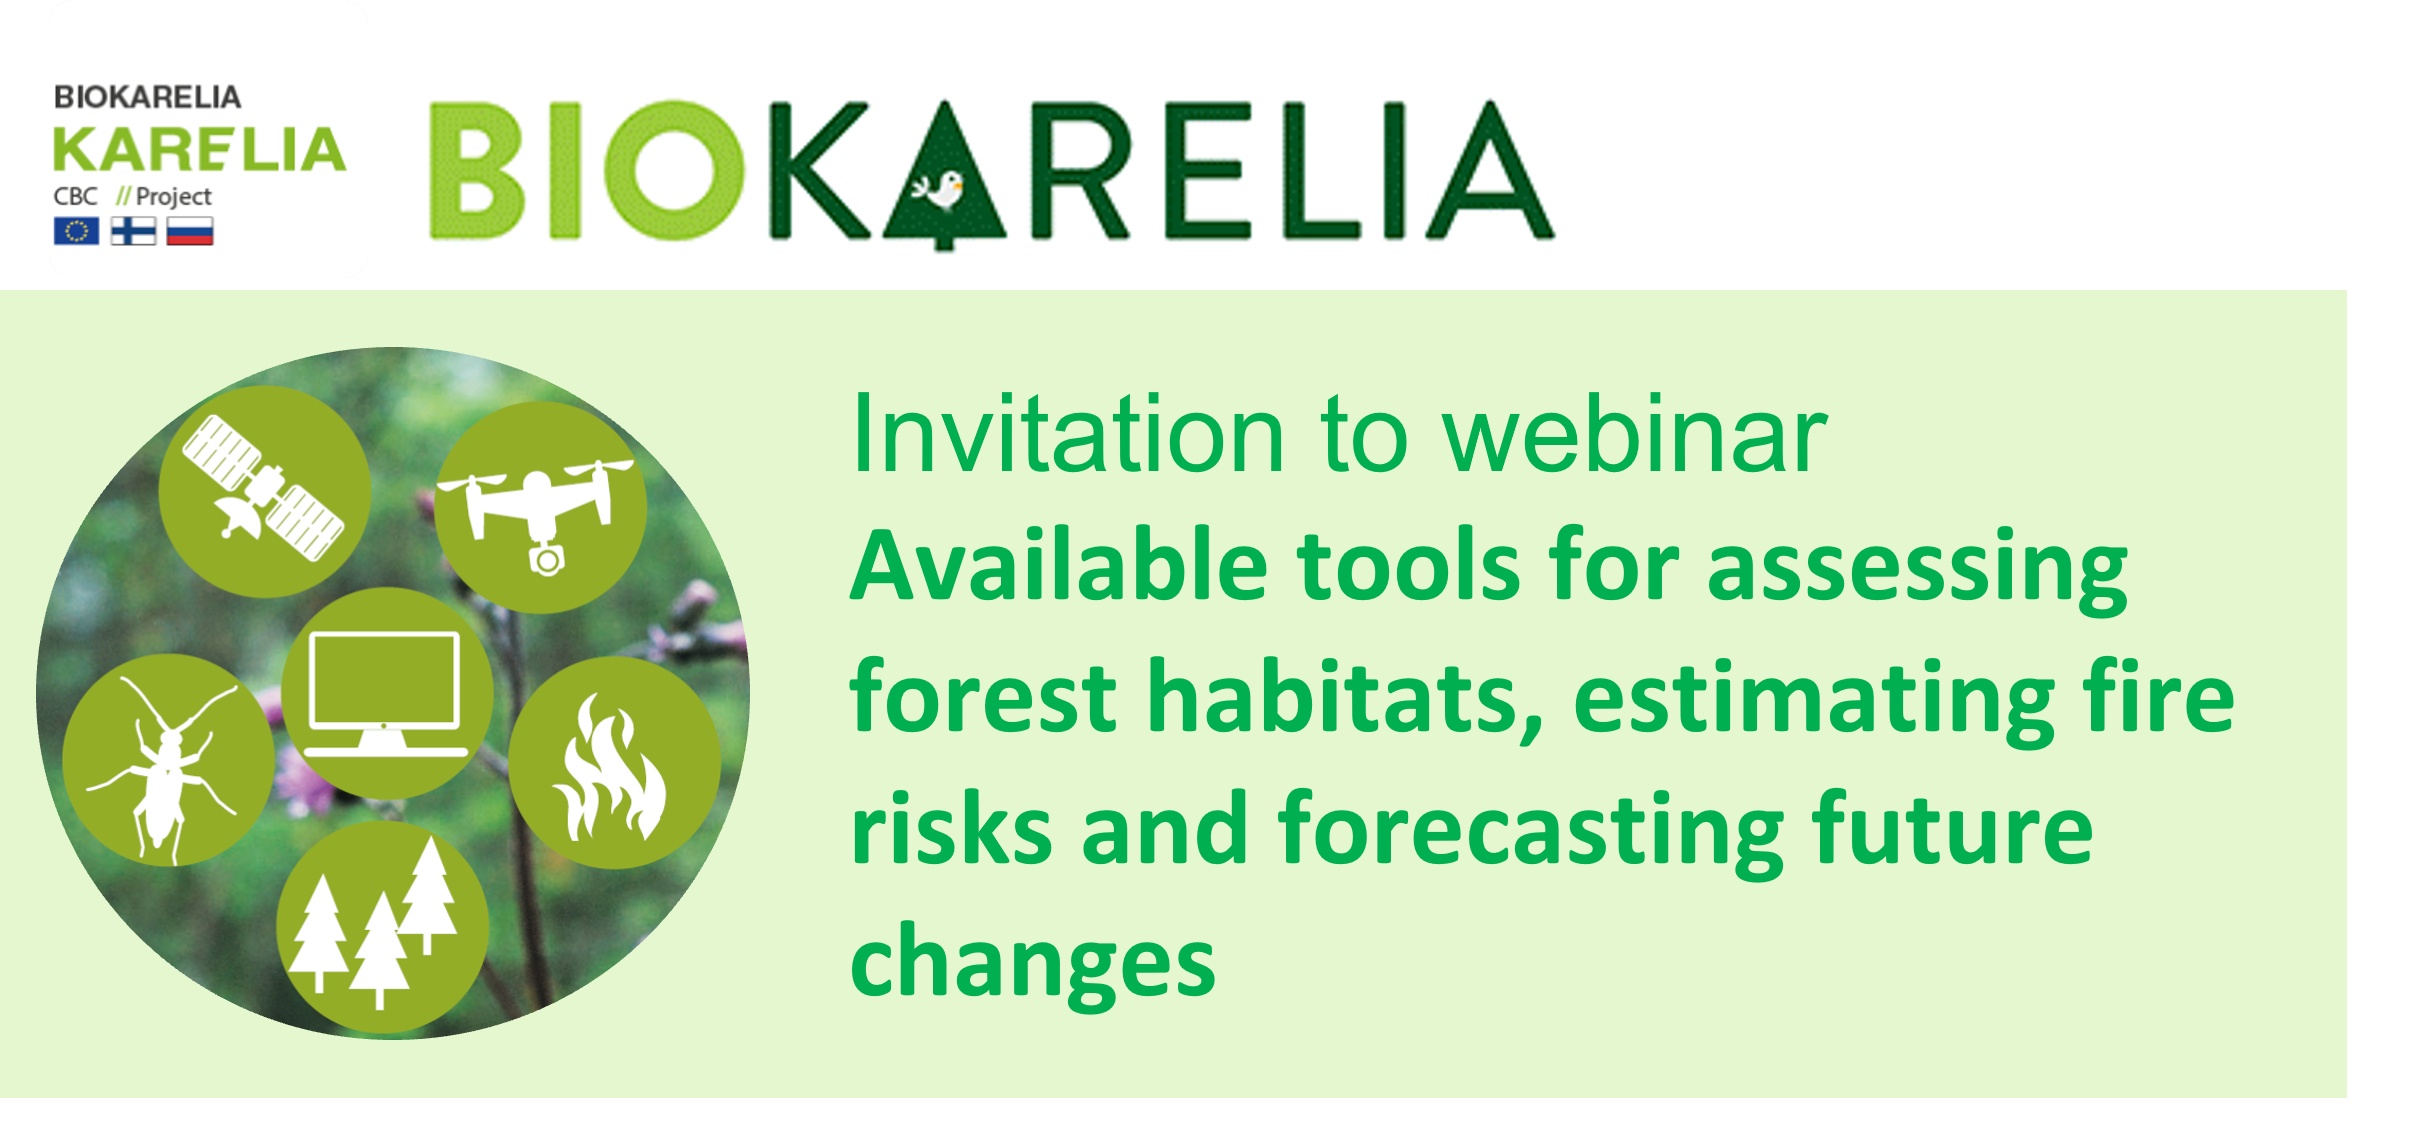 Picture with the name of the webinar: Available tools for assessing forest habitats, estimating fire risks and forecasting future changes